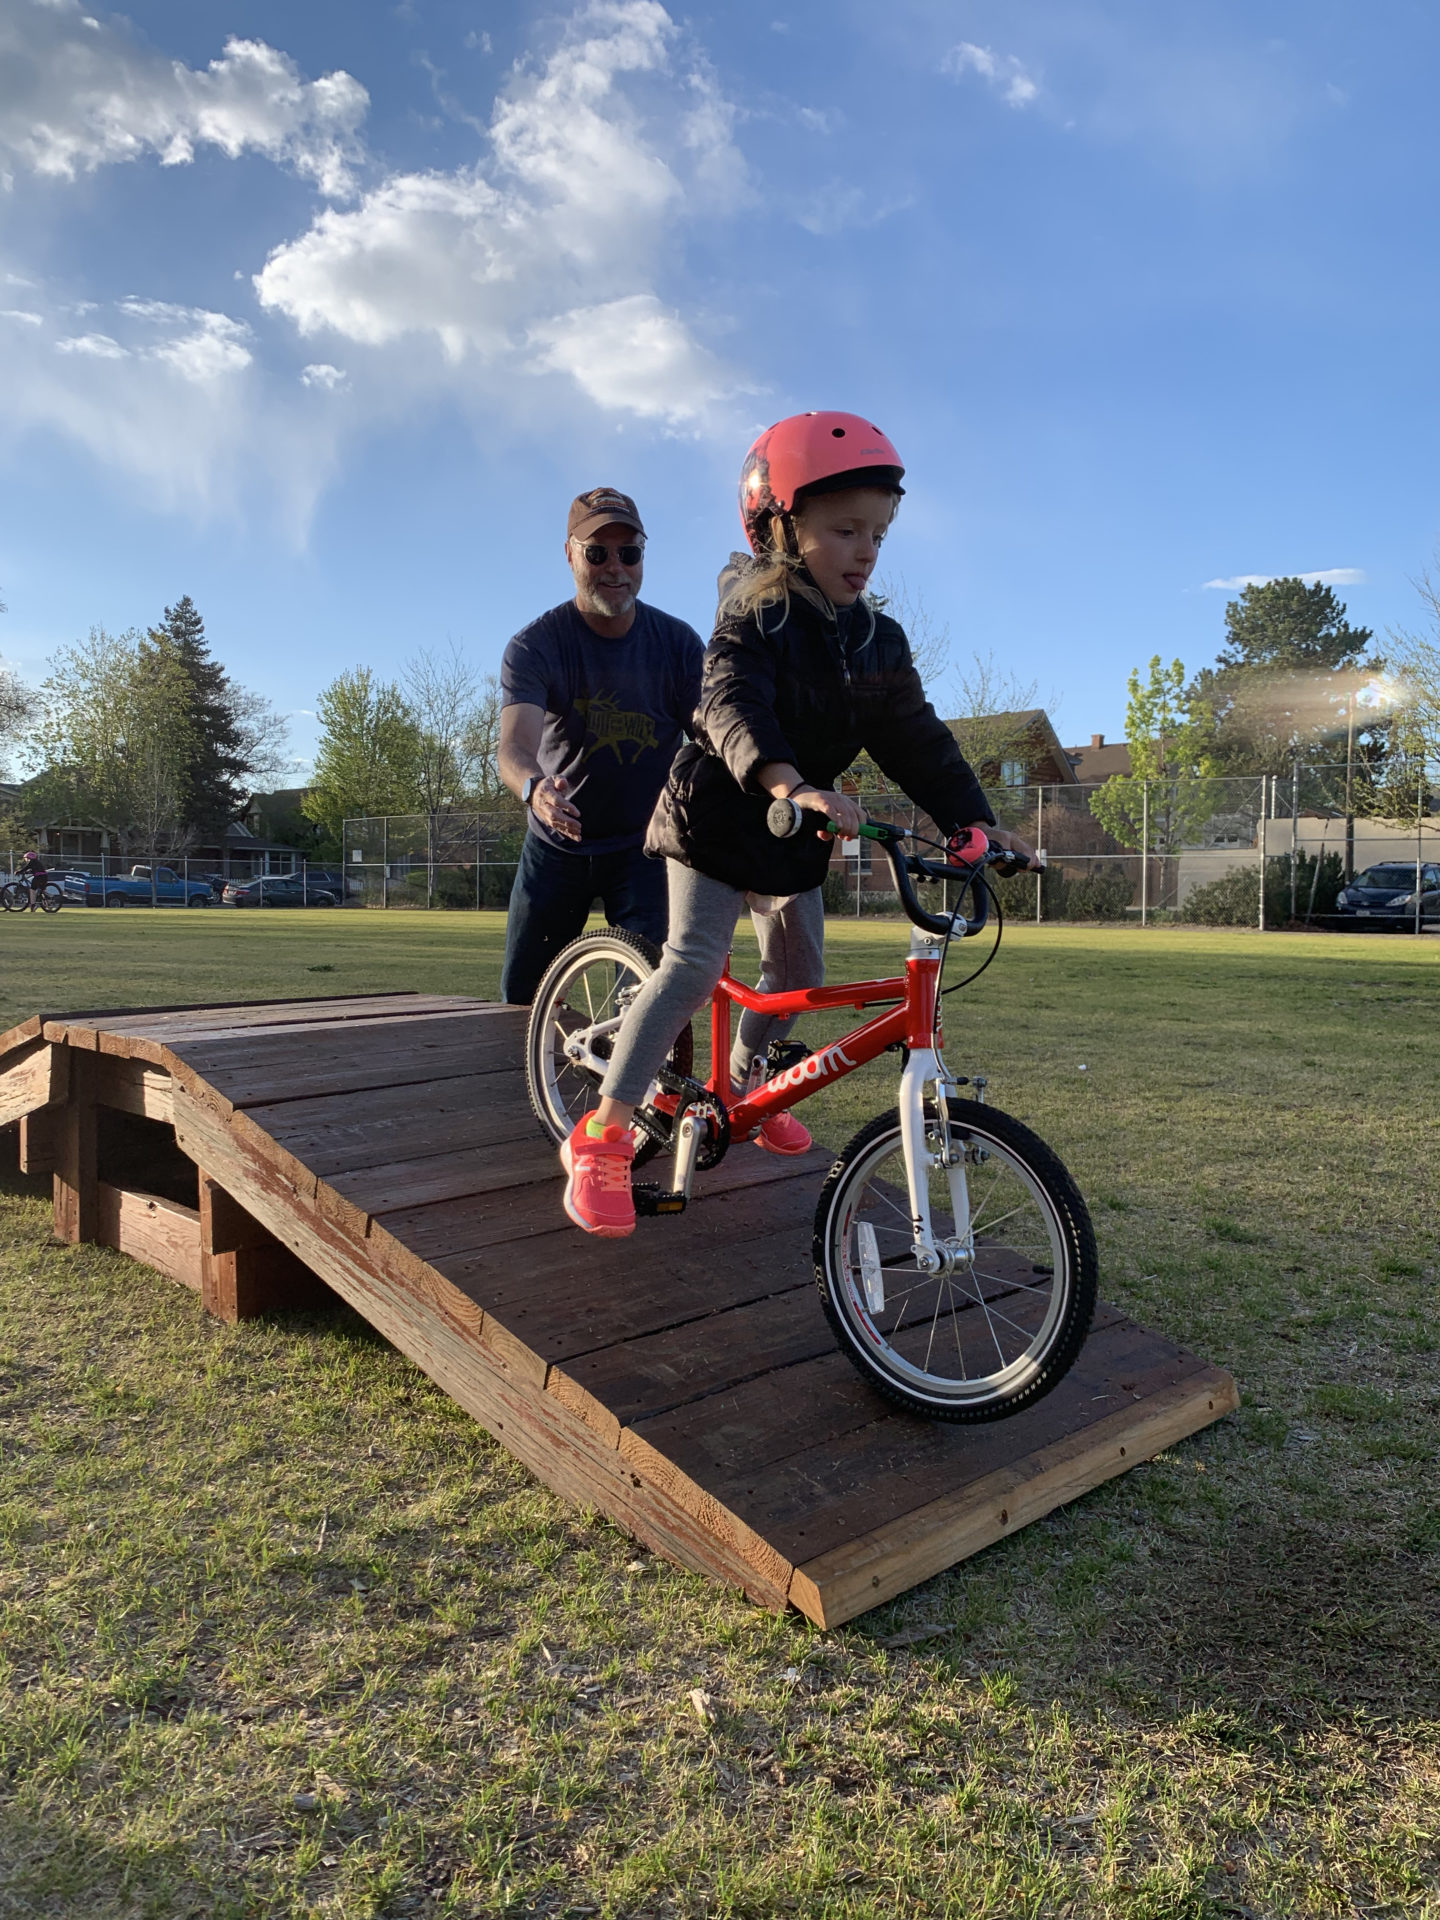 A child wearing a helmet rides down a wooden ramp over a grass field. There is an adult behind her.